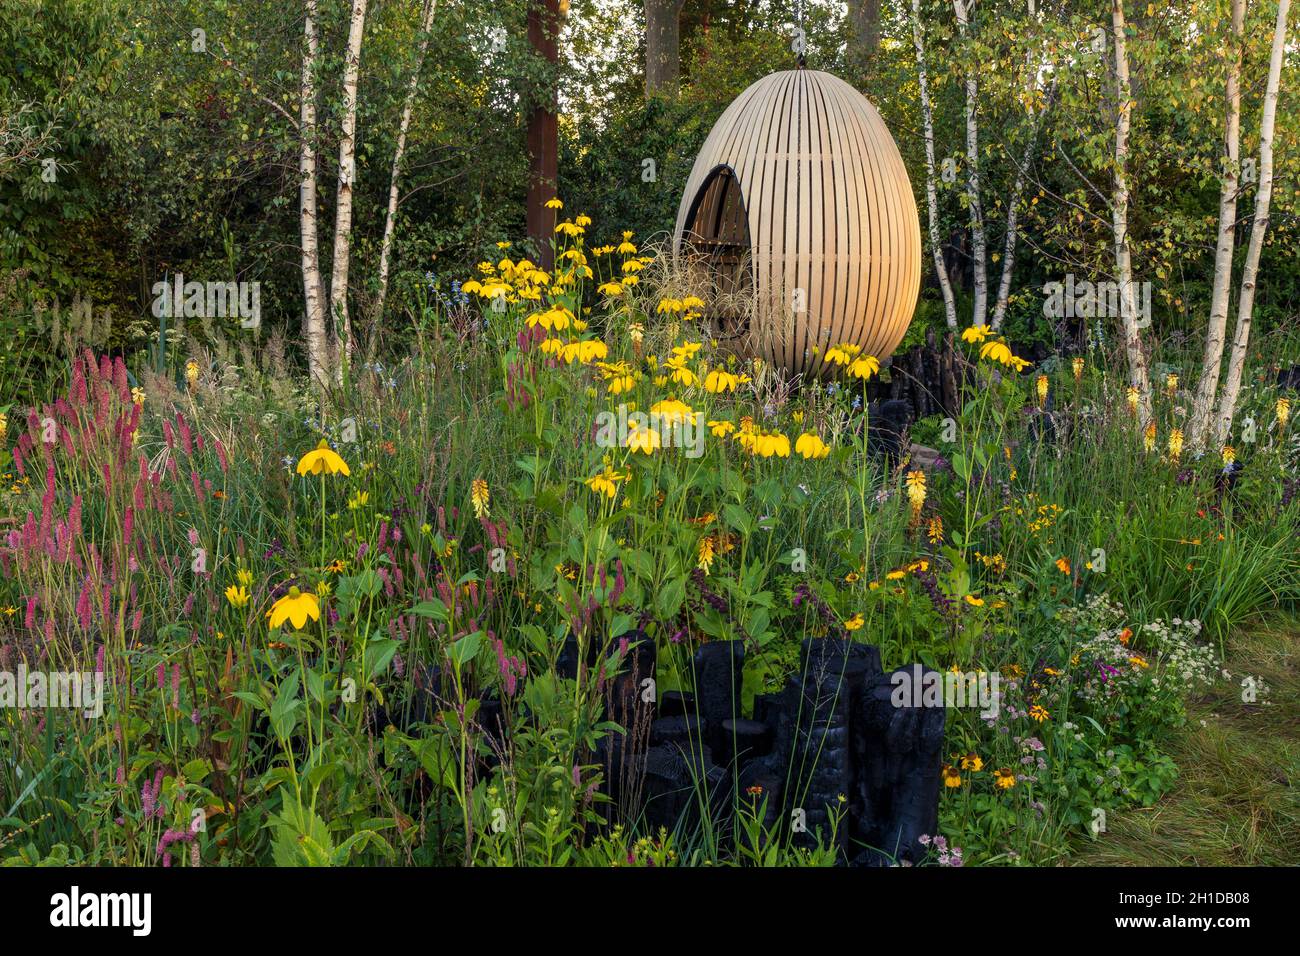 Yeo Valley Organic Garden. Early morning sunlight glances off the suspended, steam-bent, oak egg seat which forms the focal point of the garden. Natur Stock Photo